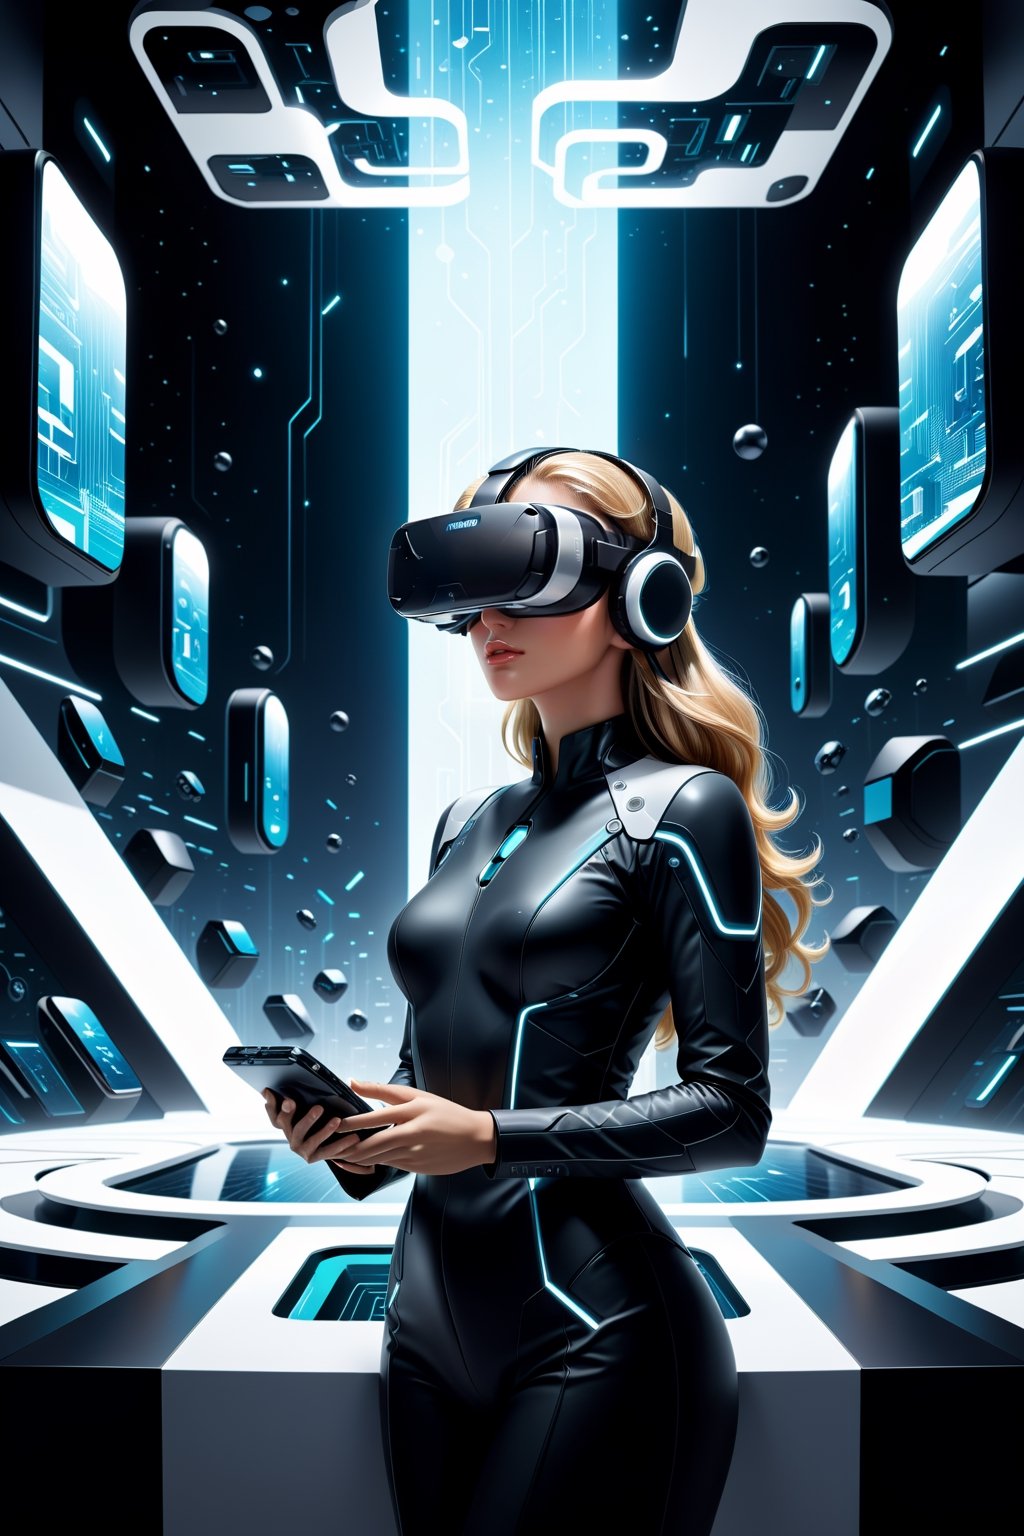 Visualize a sleek (((line art scene))), where a modern worker immerses themselves in a (((mesmerizing virtual reality world))). Bold, interlocking geometric shapes and swirling patterns compose the backdrop, with the central figure, elegantly drawn with sharp edges and soft shading, wearing a VR headset, transfixed by the digital realm. Glowing, floating screens and holographic displays add to the futuristic atmosphere. In a timeless monochrome color scheme, this illustration invites contemplation on the boundless potential of virtual exploration. A subtle phrase, "Virtual Reality Portfolio," hints at modern innovation and advanced technology.